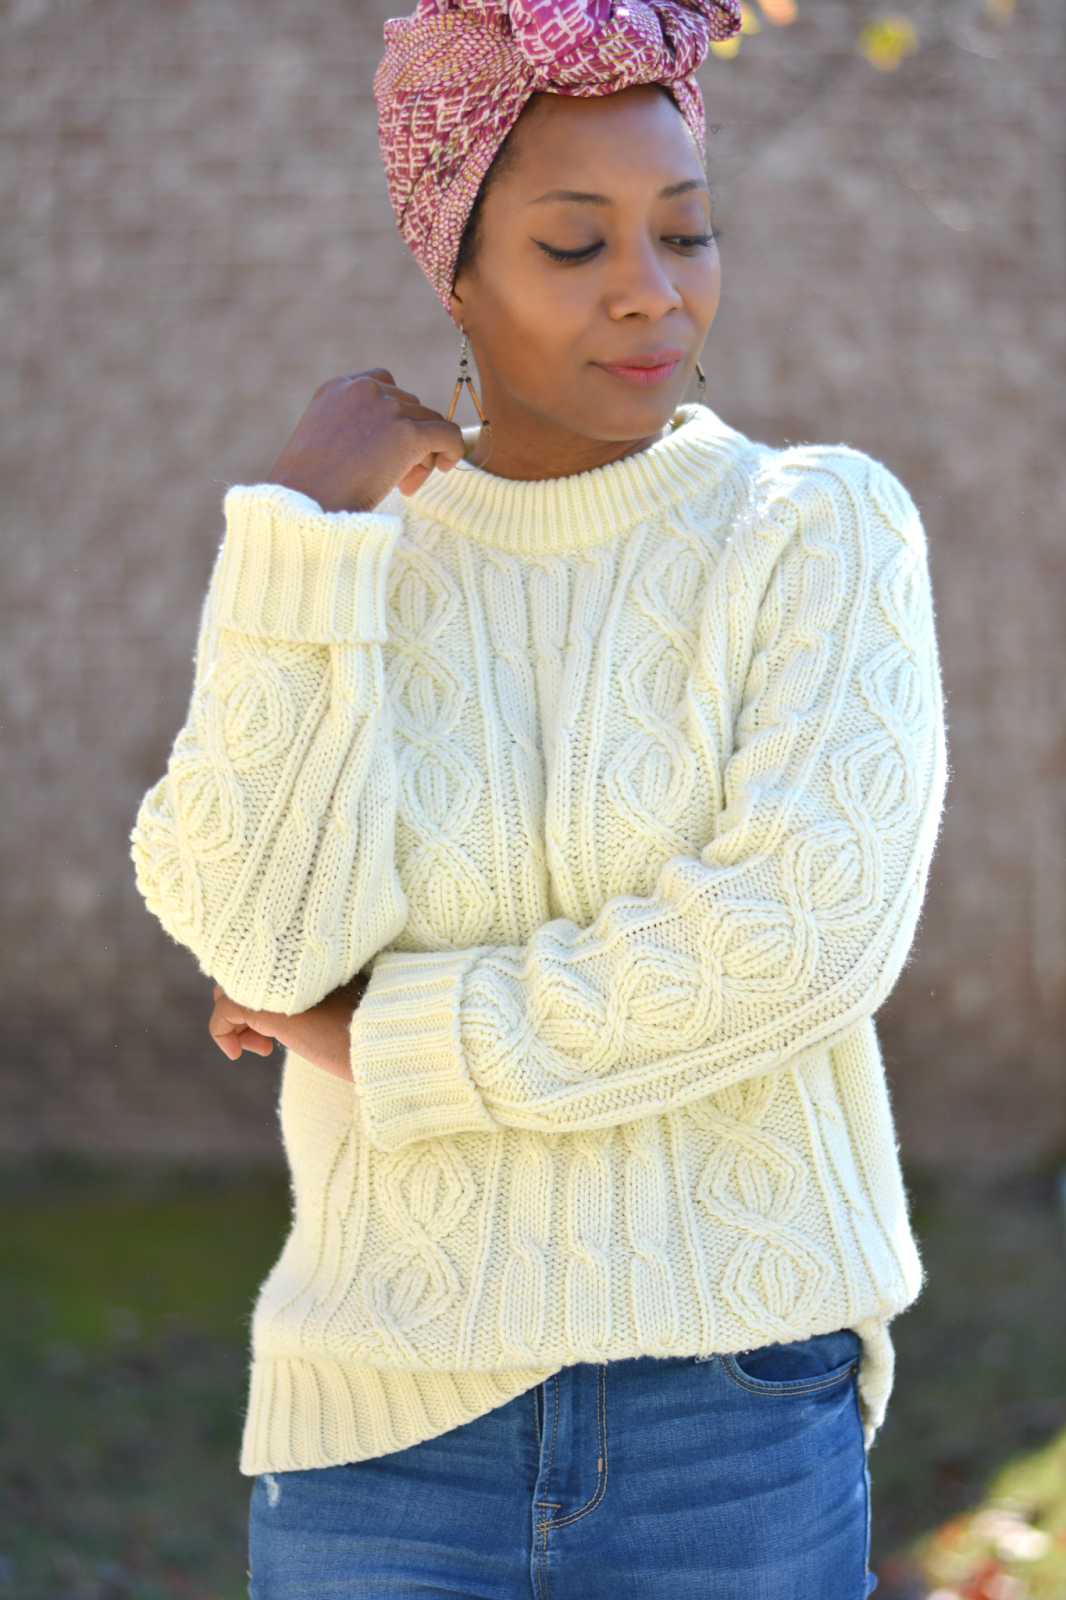 thrift style featuring chunky sweater and ferragamo block heels